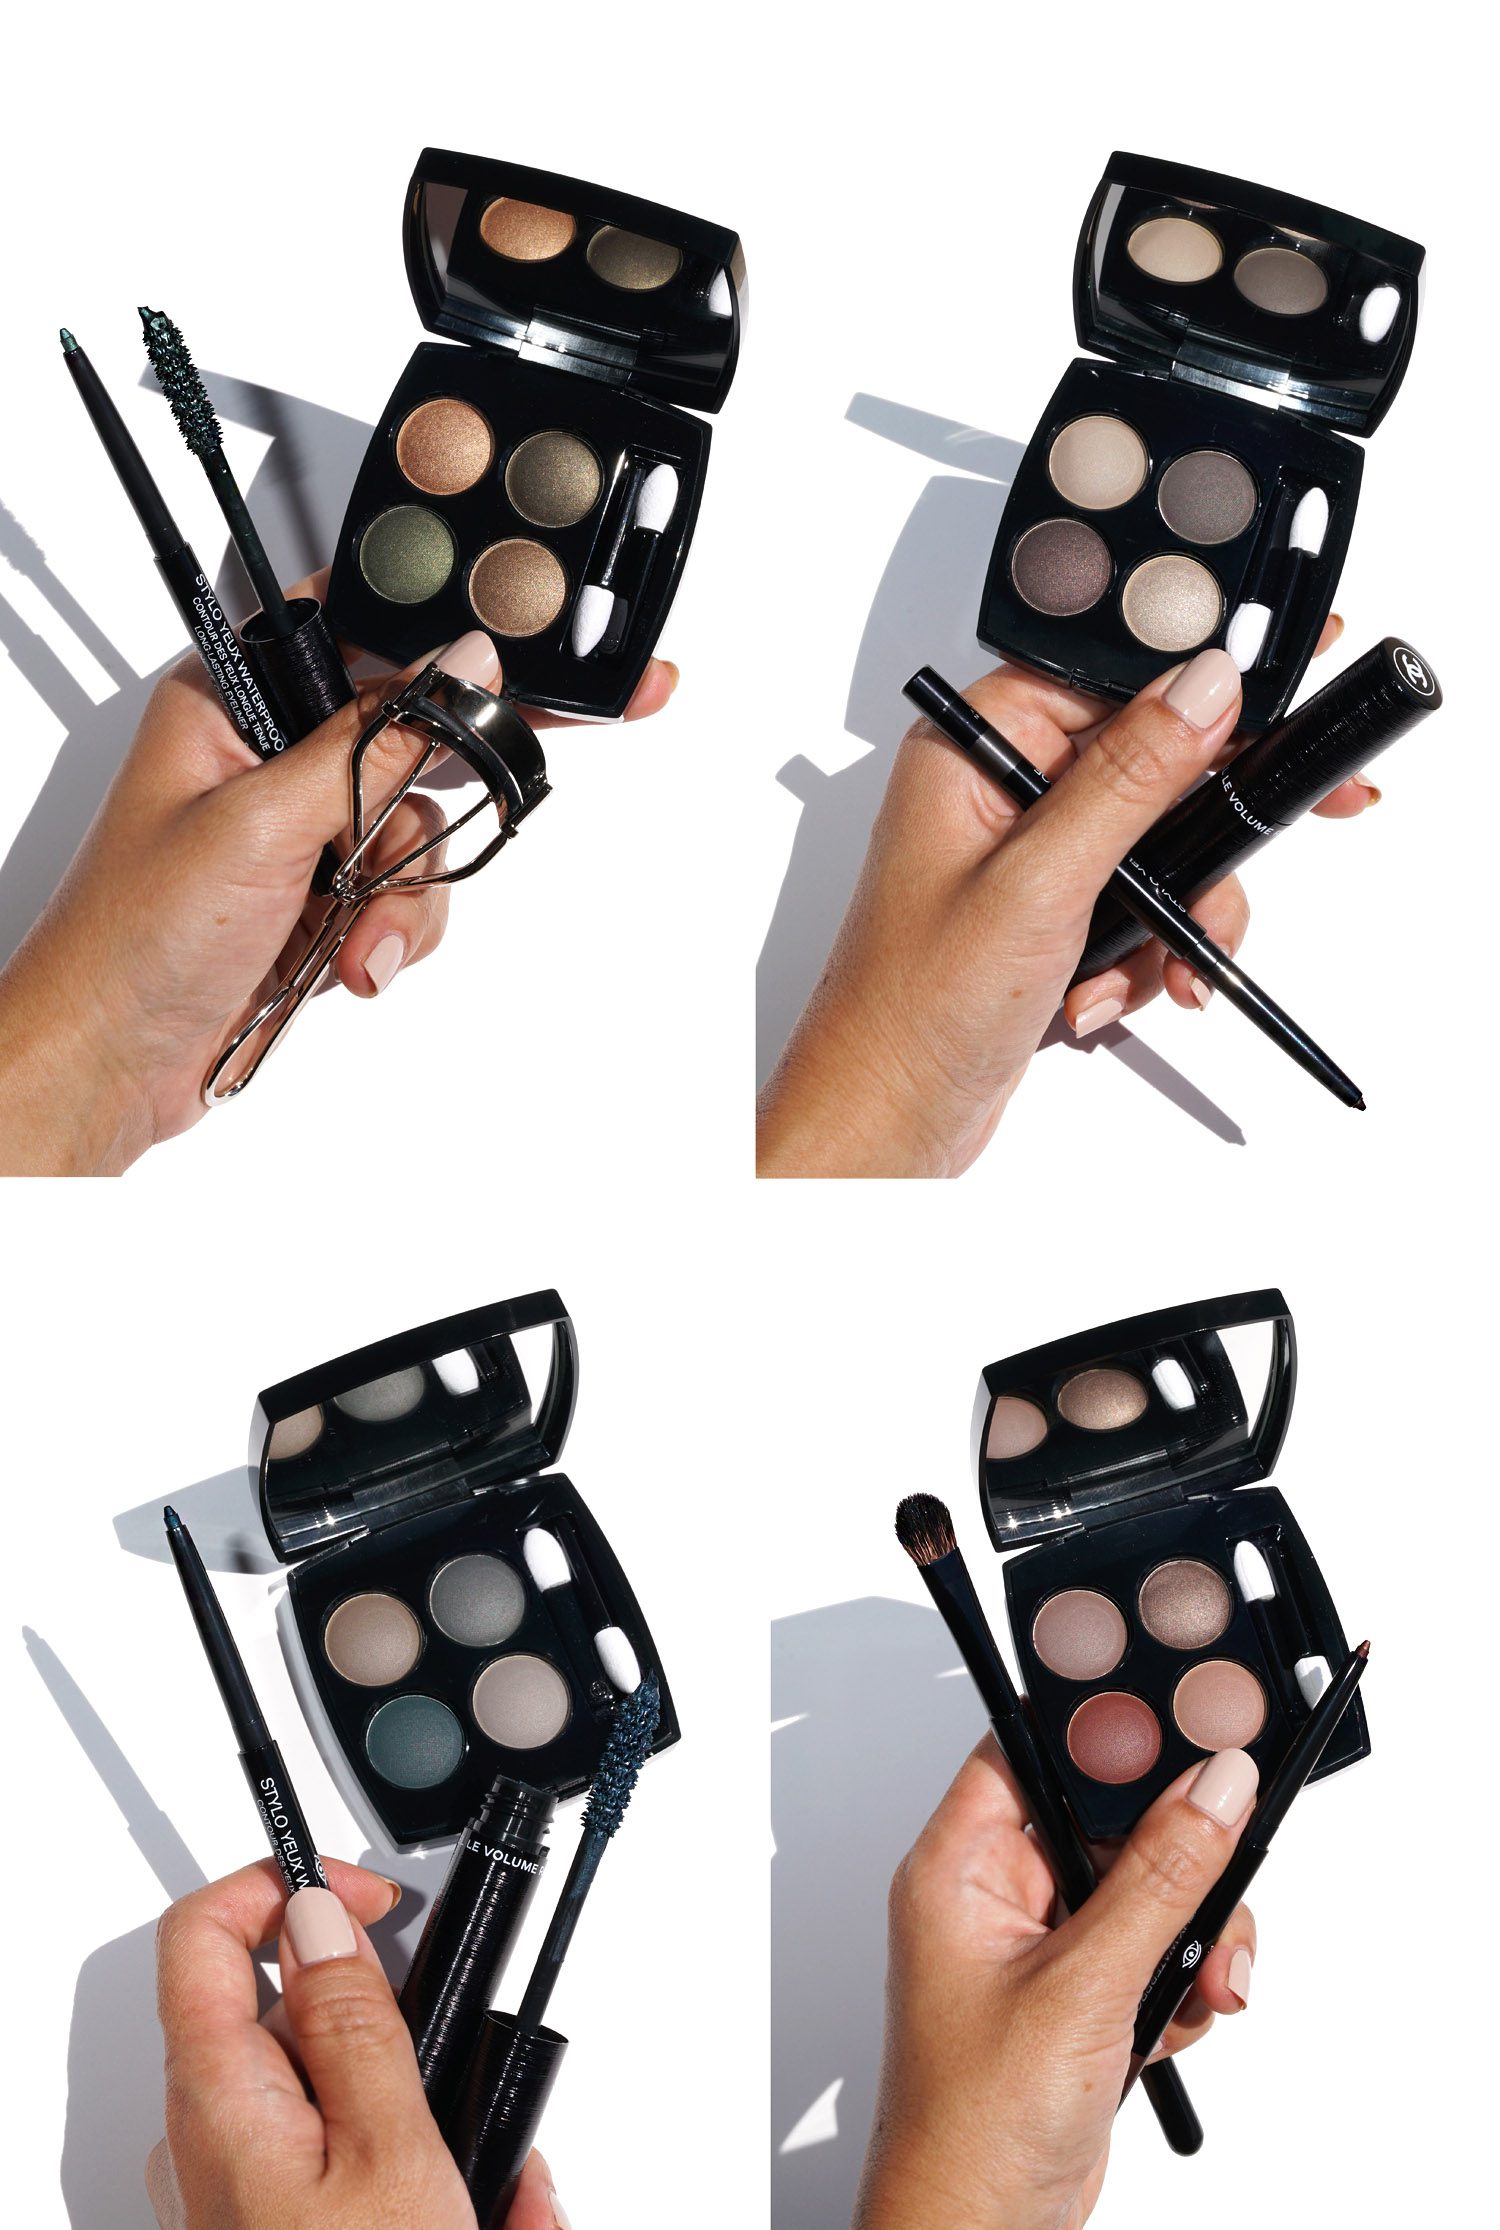 Chanel New Eye Collection Review + Swatches - Beauty Look